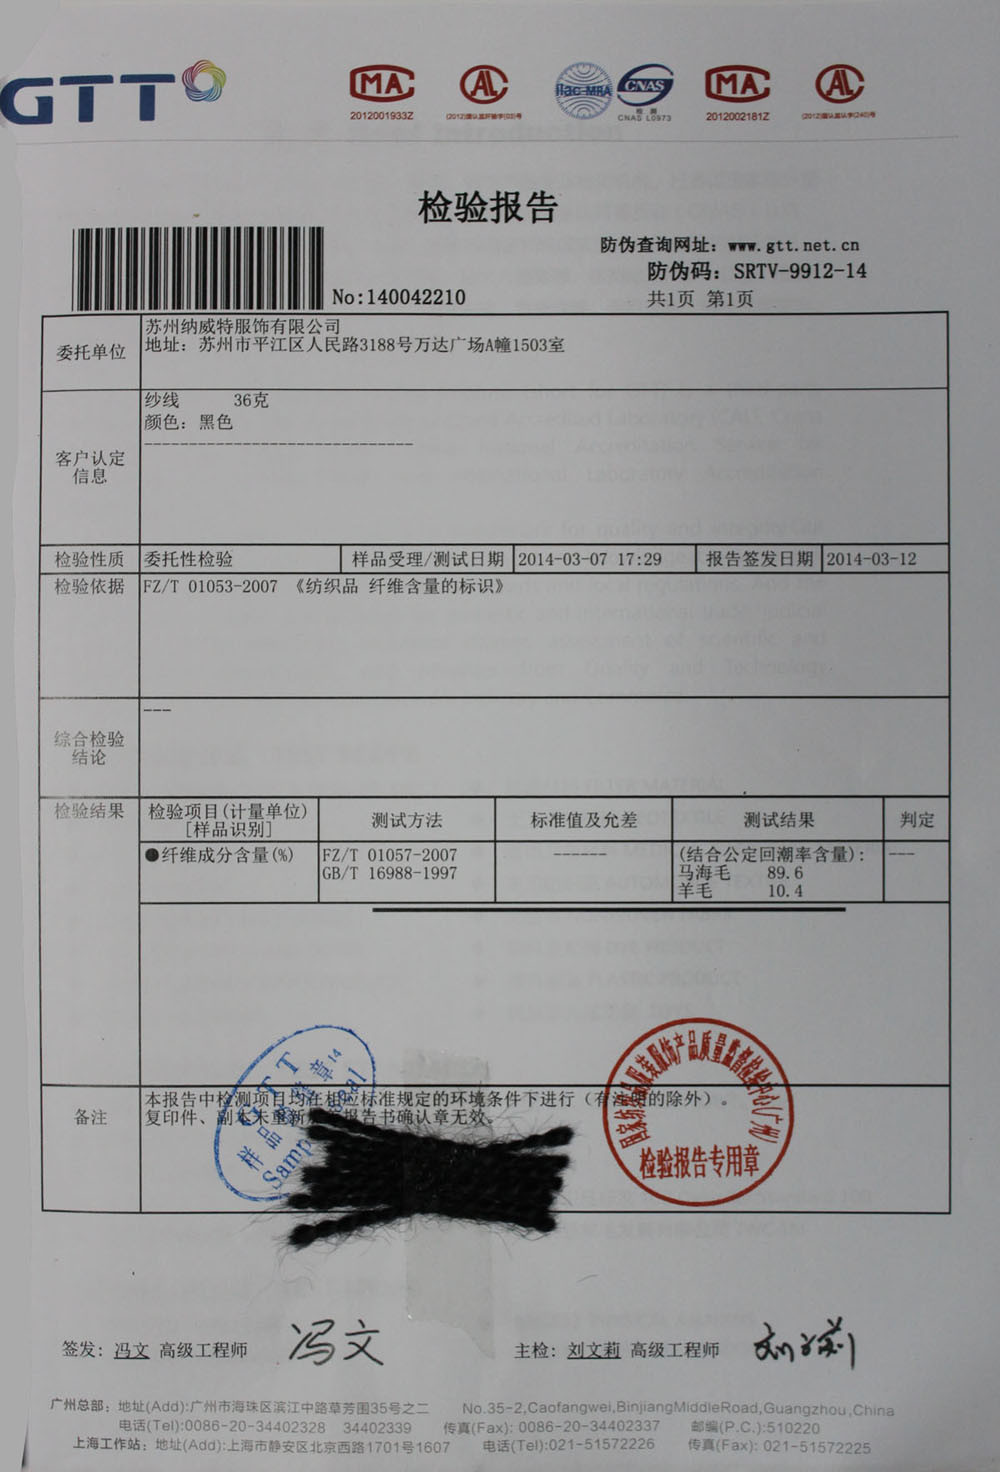 Suzhou Nice Sweater Clothes Co., Ltd. Certifications